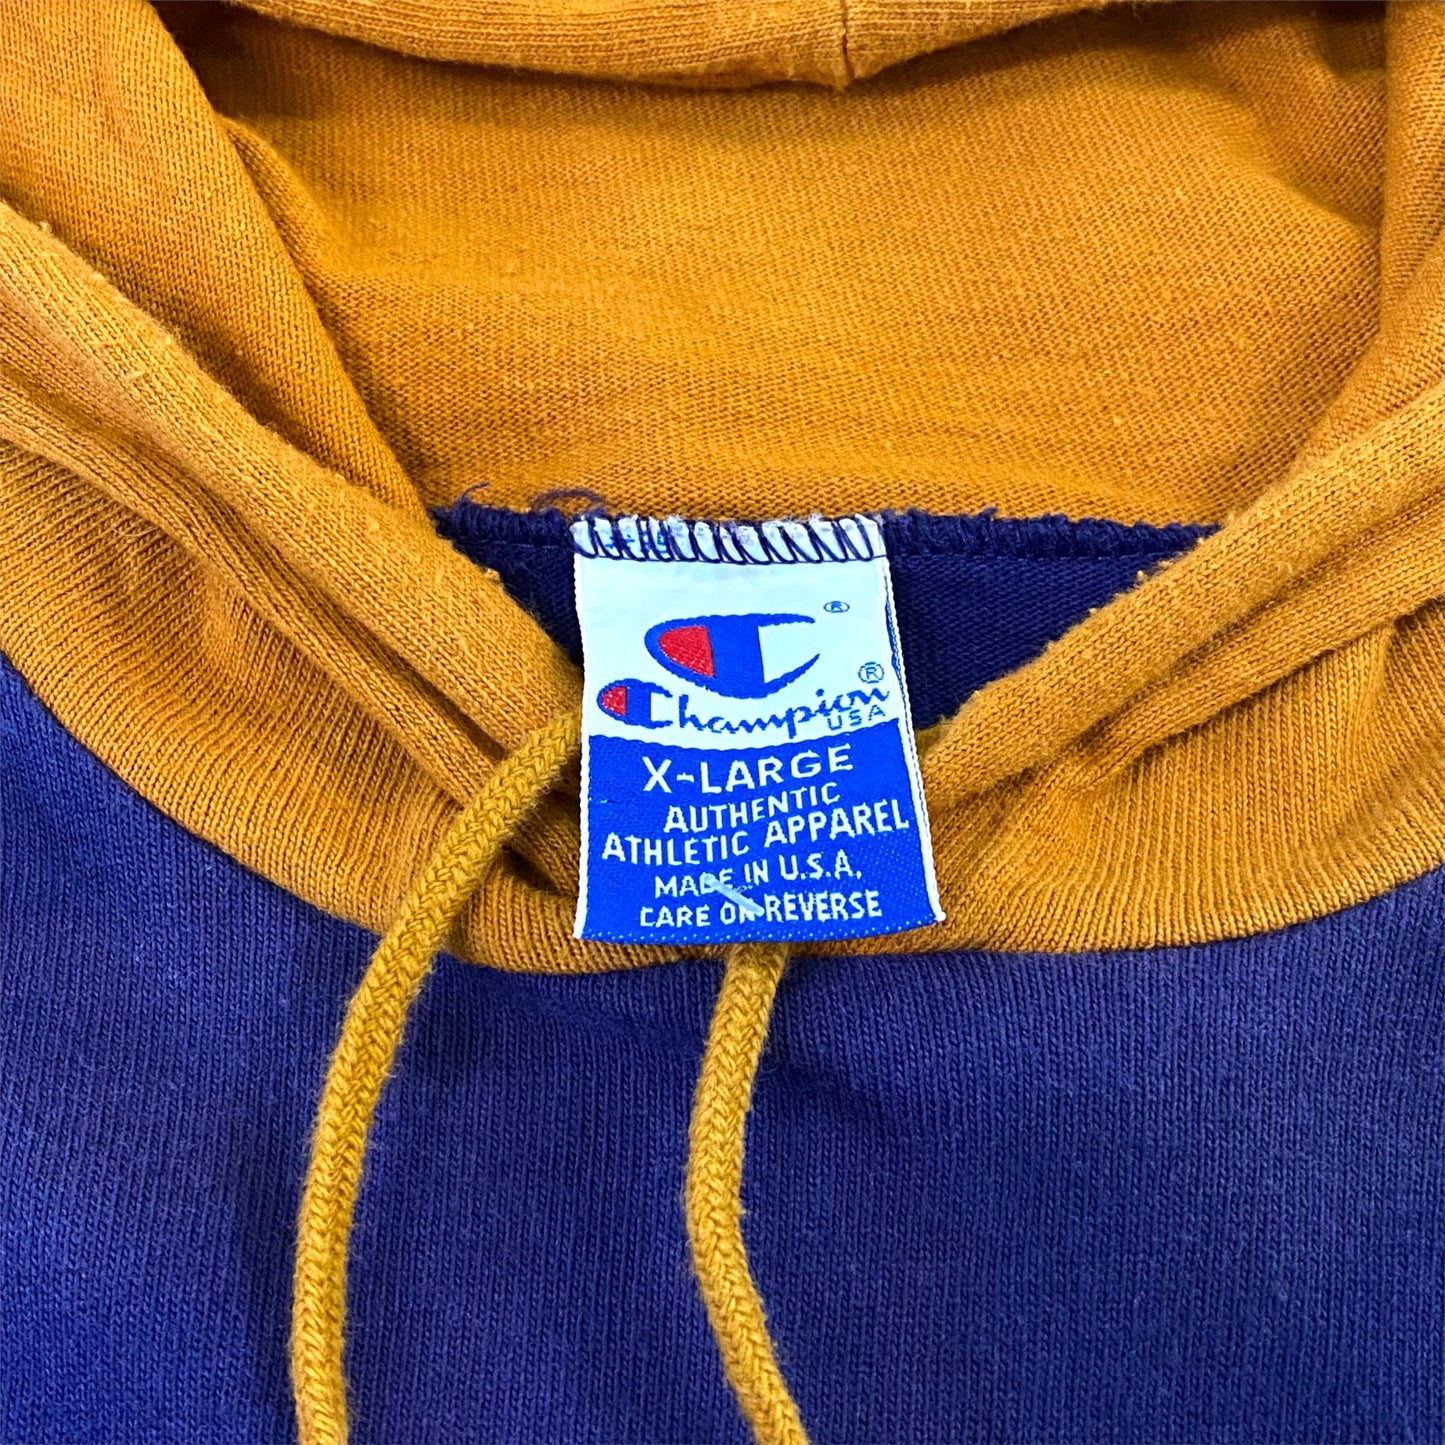 90's "Champion" Hooded l/s t-shirt